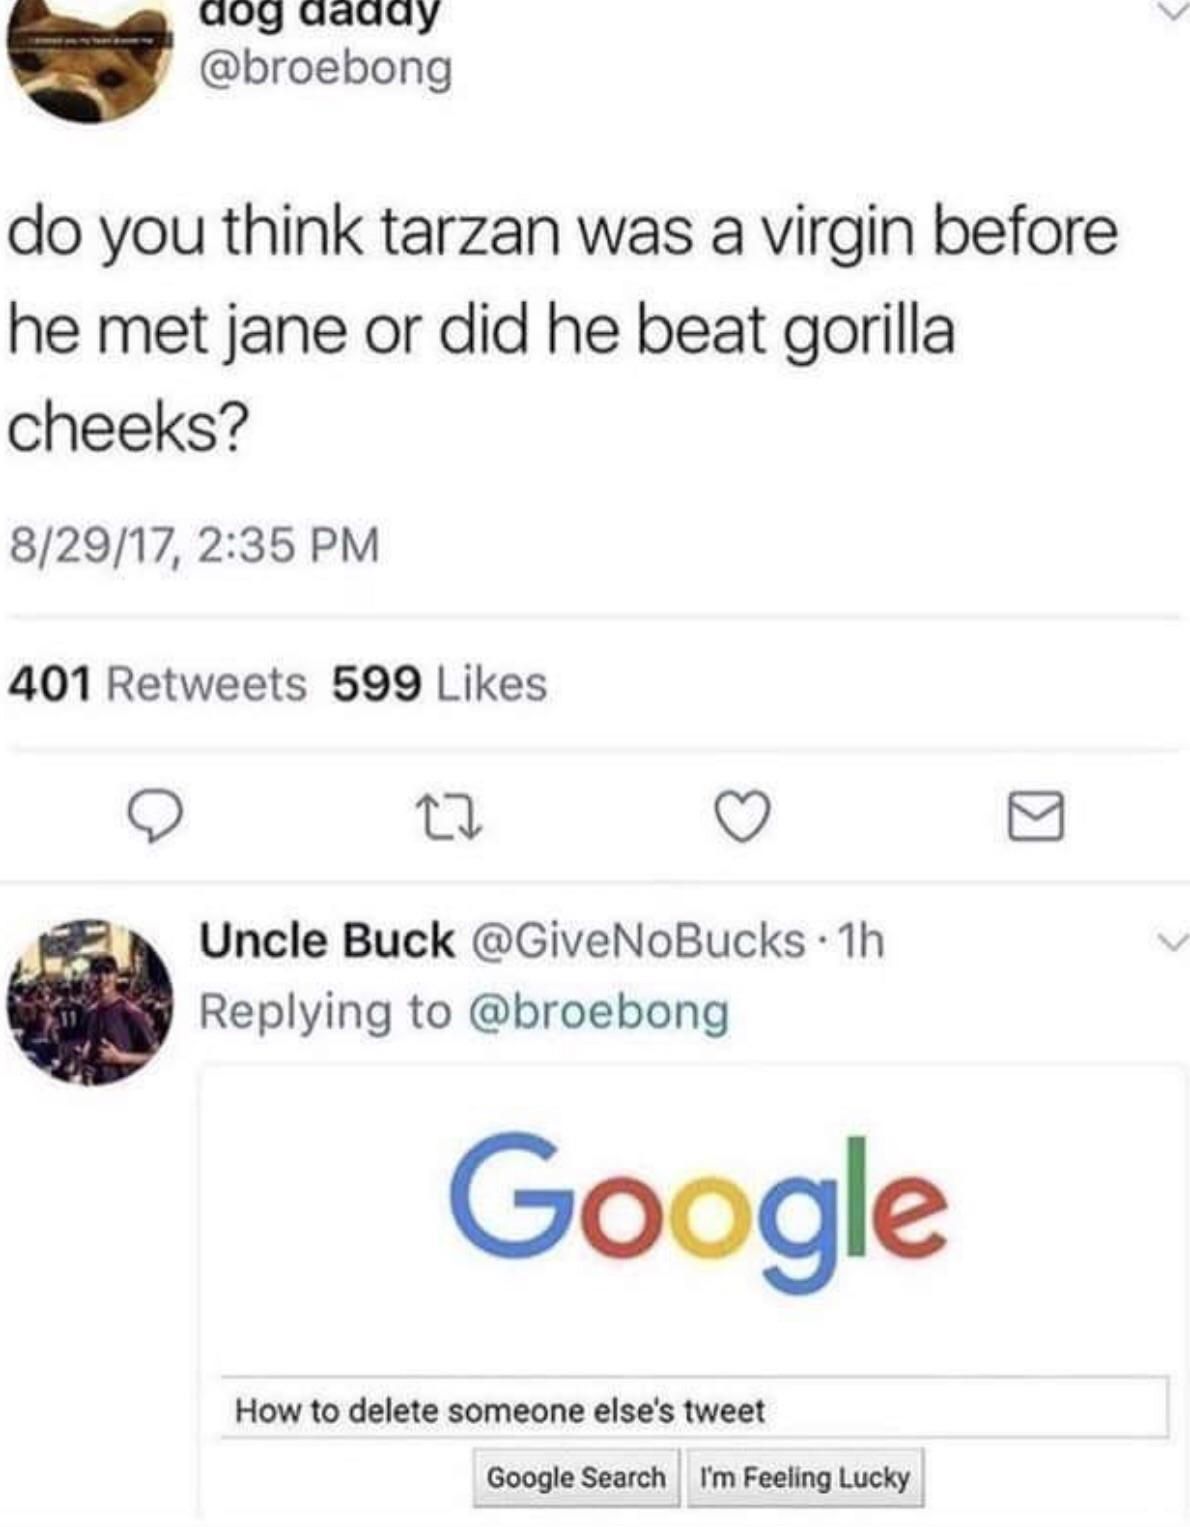 Funny tweet that someone asks about if Tarzan was virgin before meeting Jane or was he beating gorilla cheeks and Uncle Buck asks how to delete someone elses tweet.